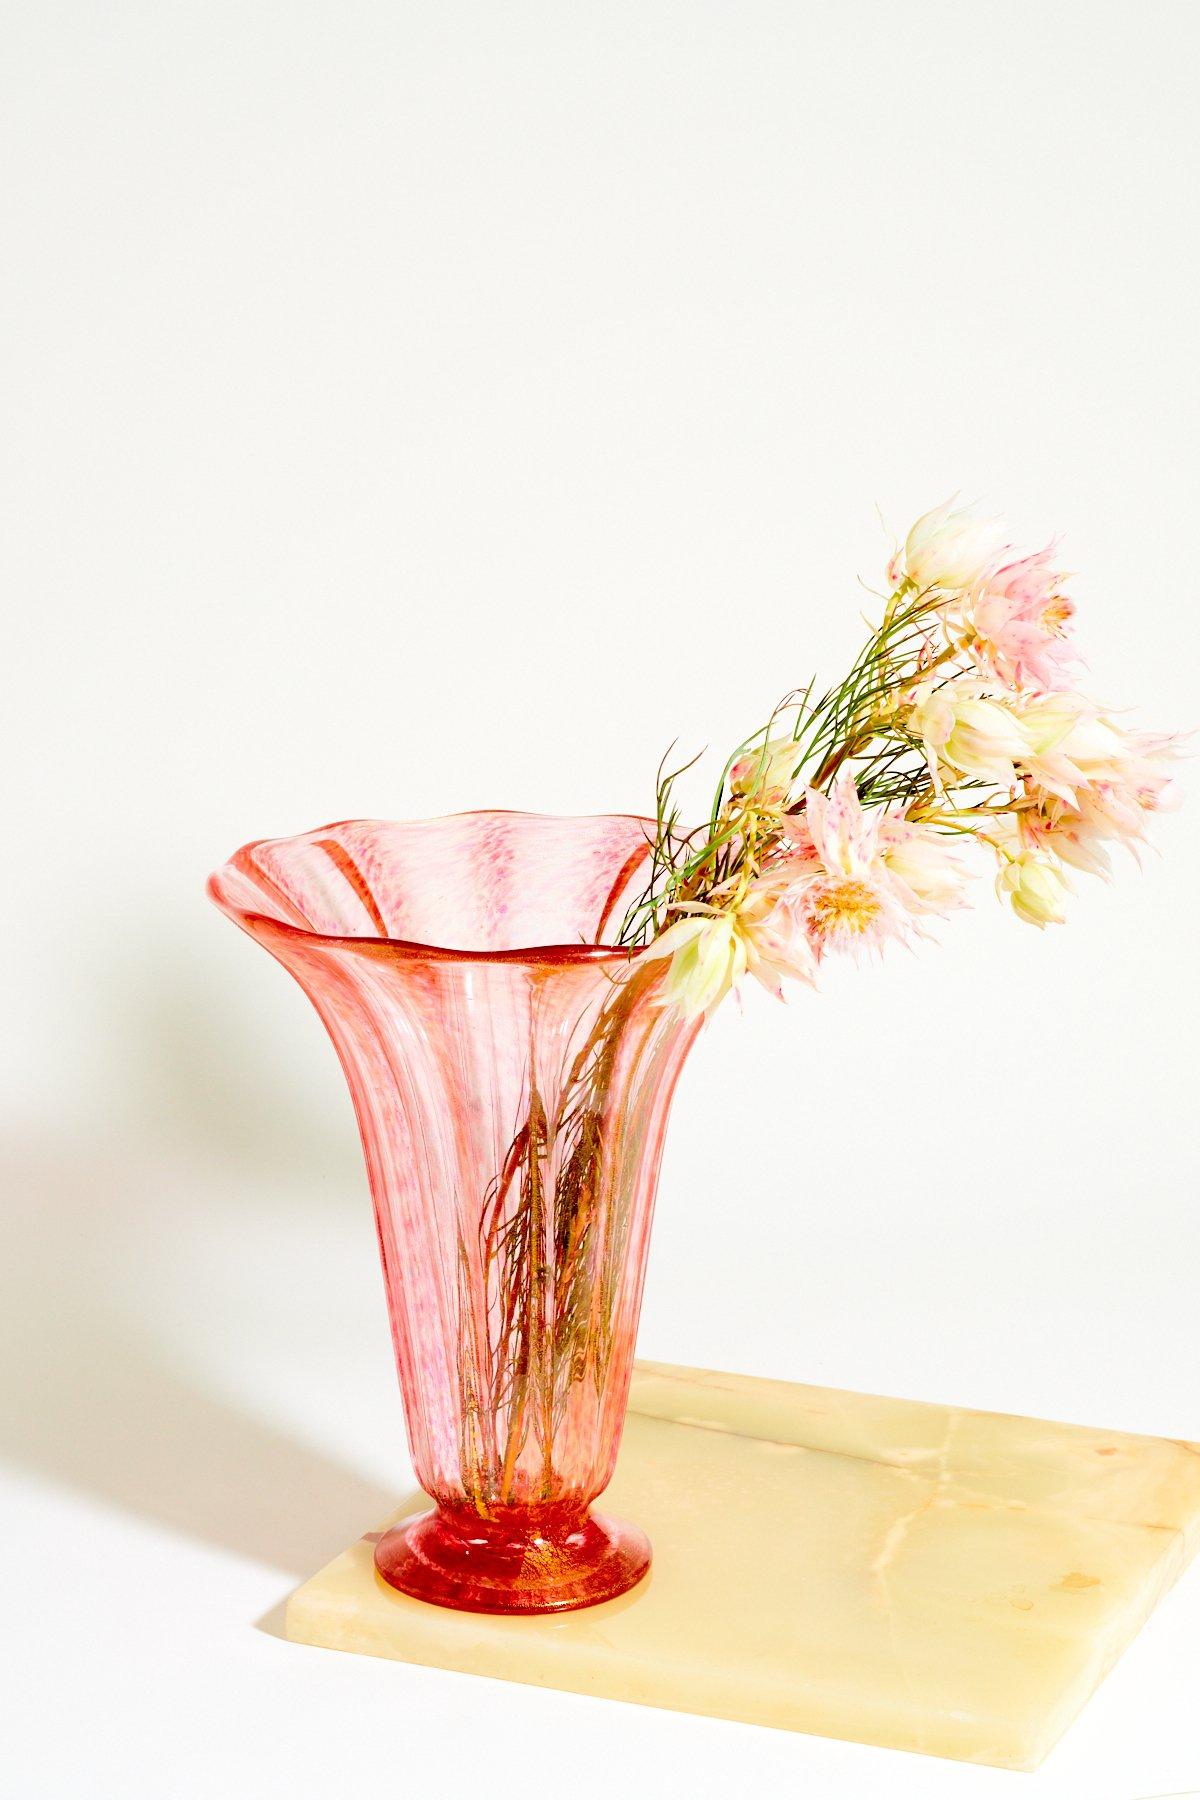 Alfredo Barbini fluted glass vase, trumpet shaped with a waved rim , subtle pink spatters, deeper pink on pedestal base and petal like vertical accents creating the effect of a lily flower. Beautiful filled with blooms or on its own as a decorative